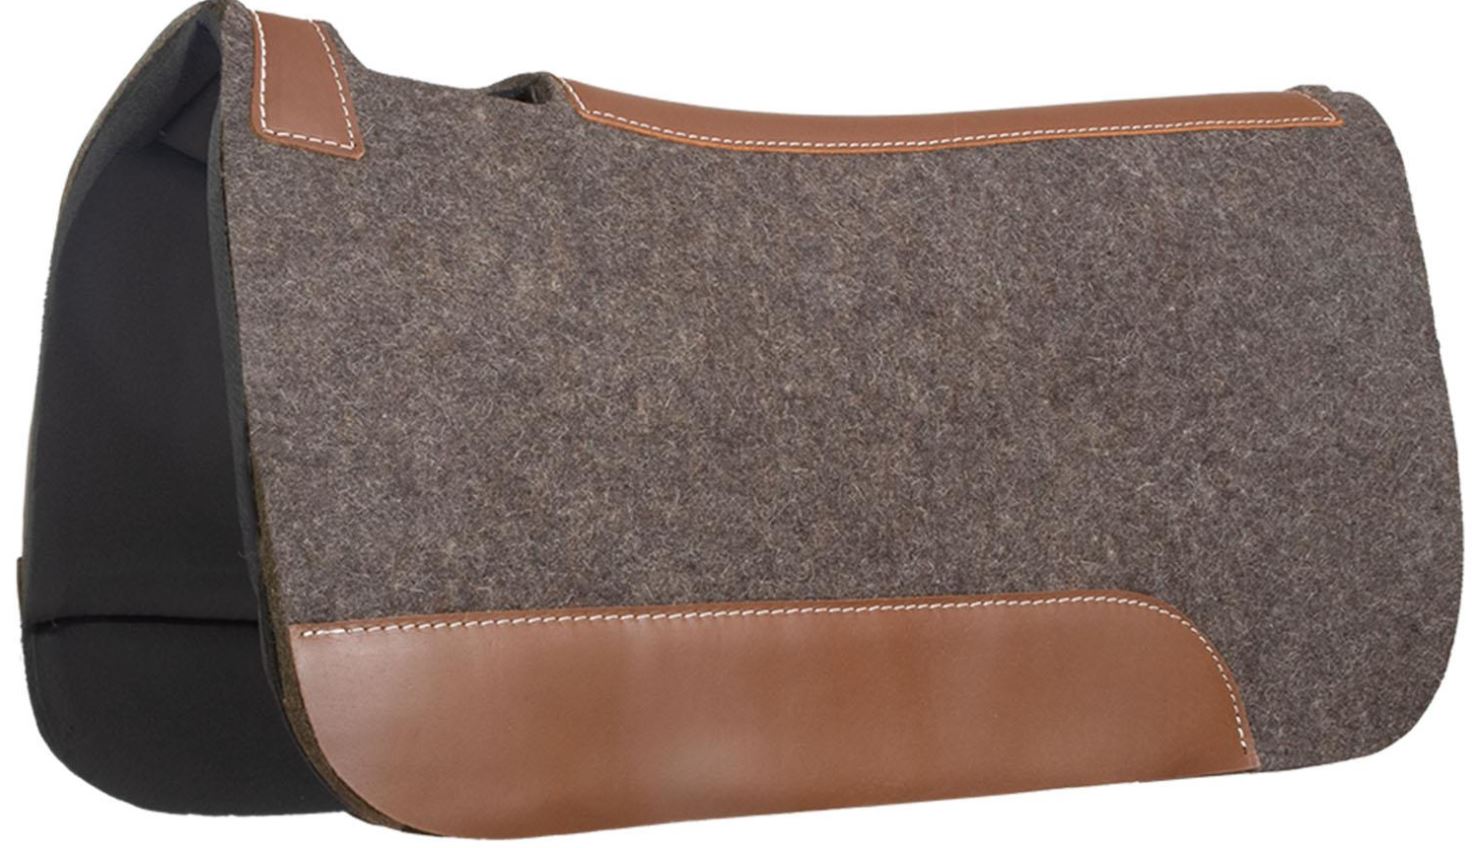 Ezy Ride Wool And Hd Pvc Contoured Pad 32X31X1 - Saddle Pad Clearance